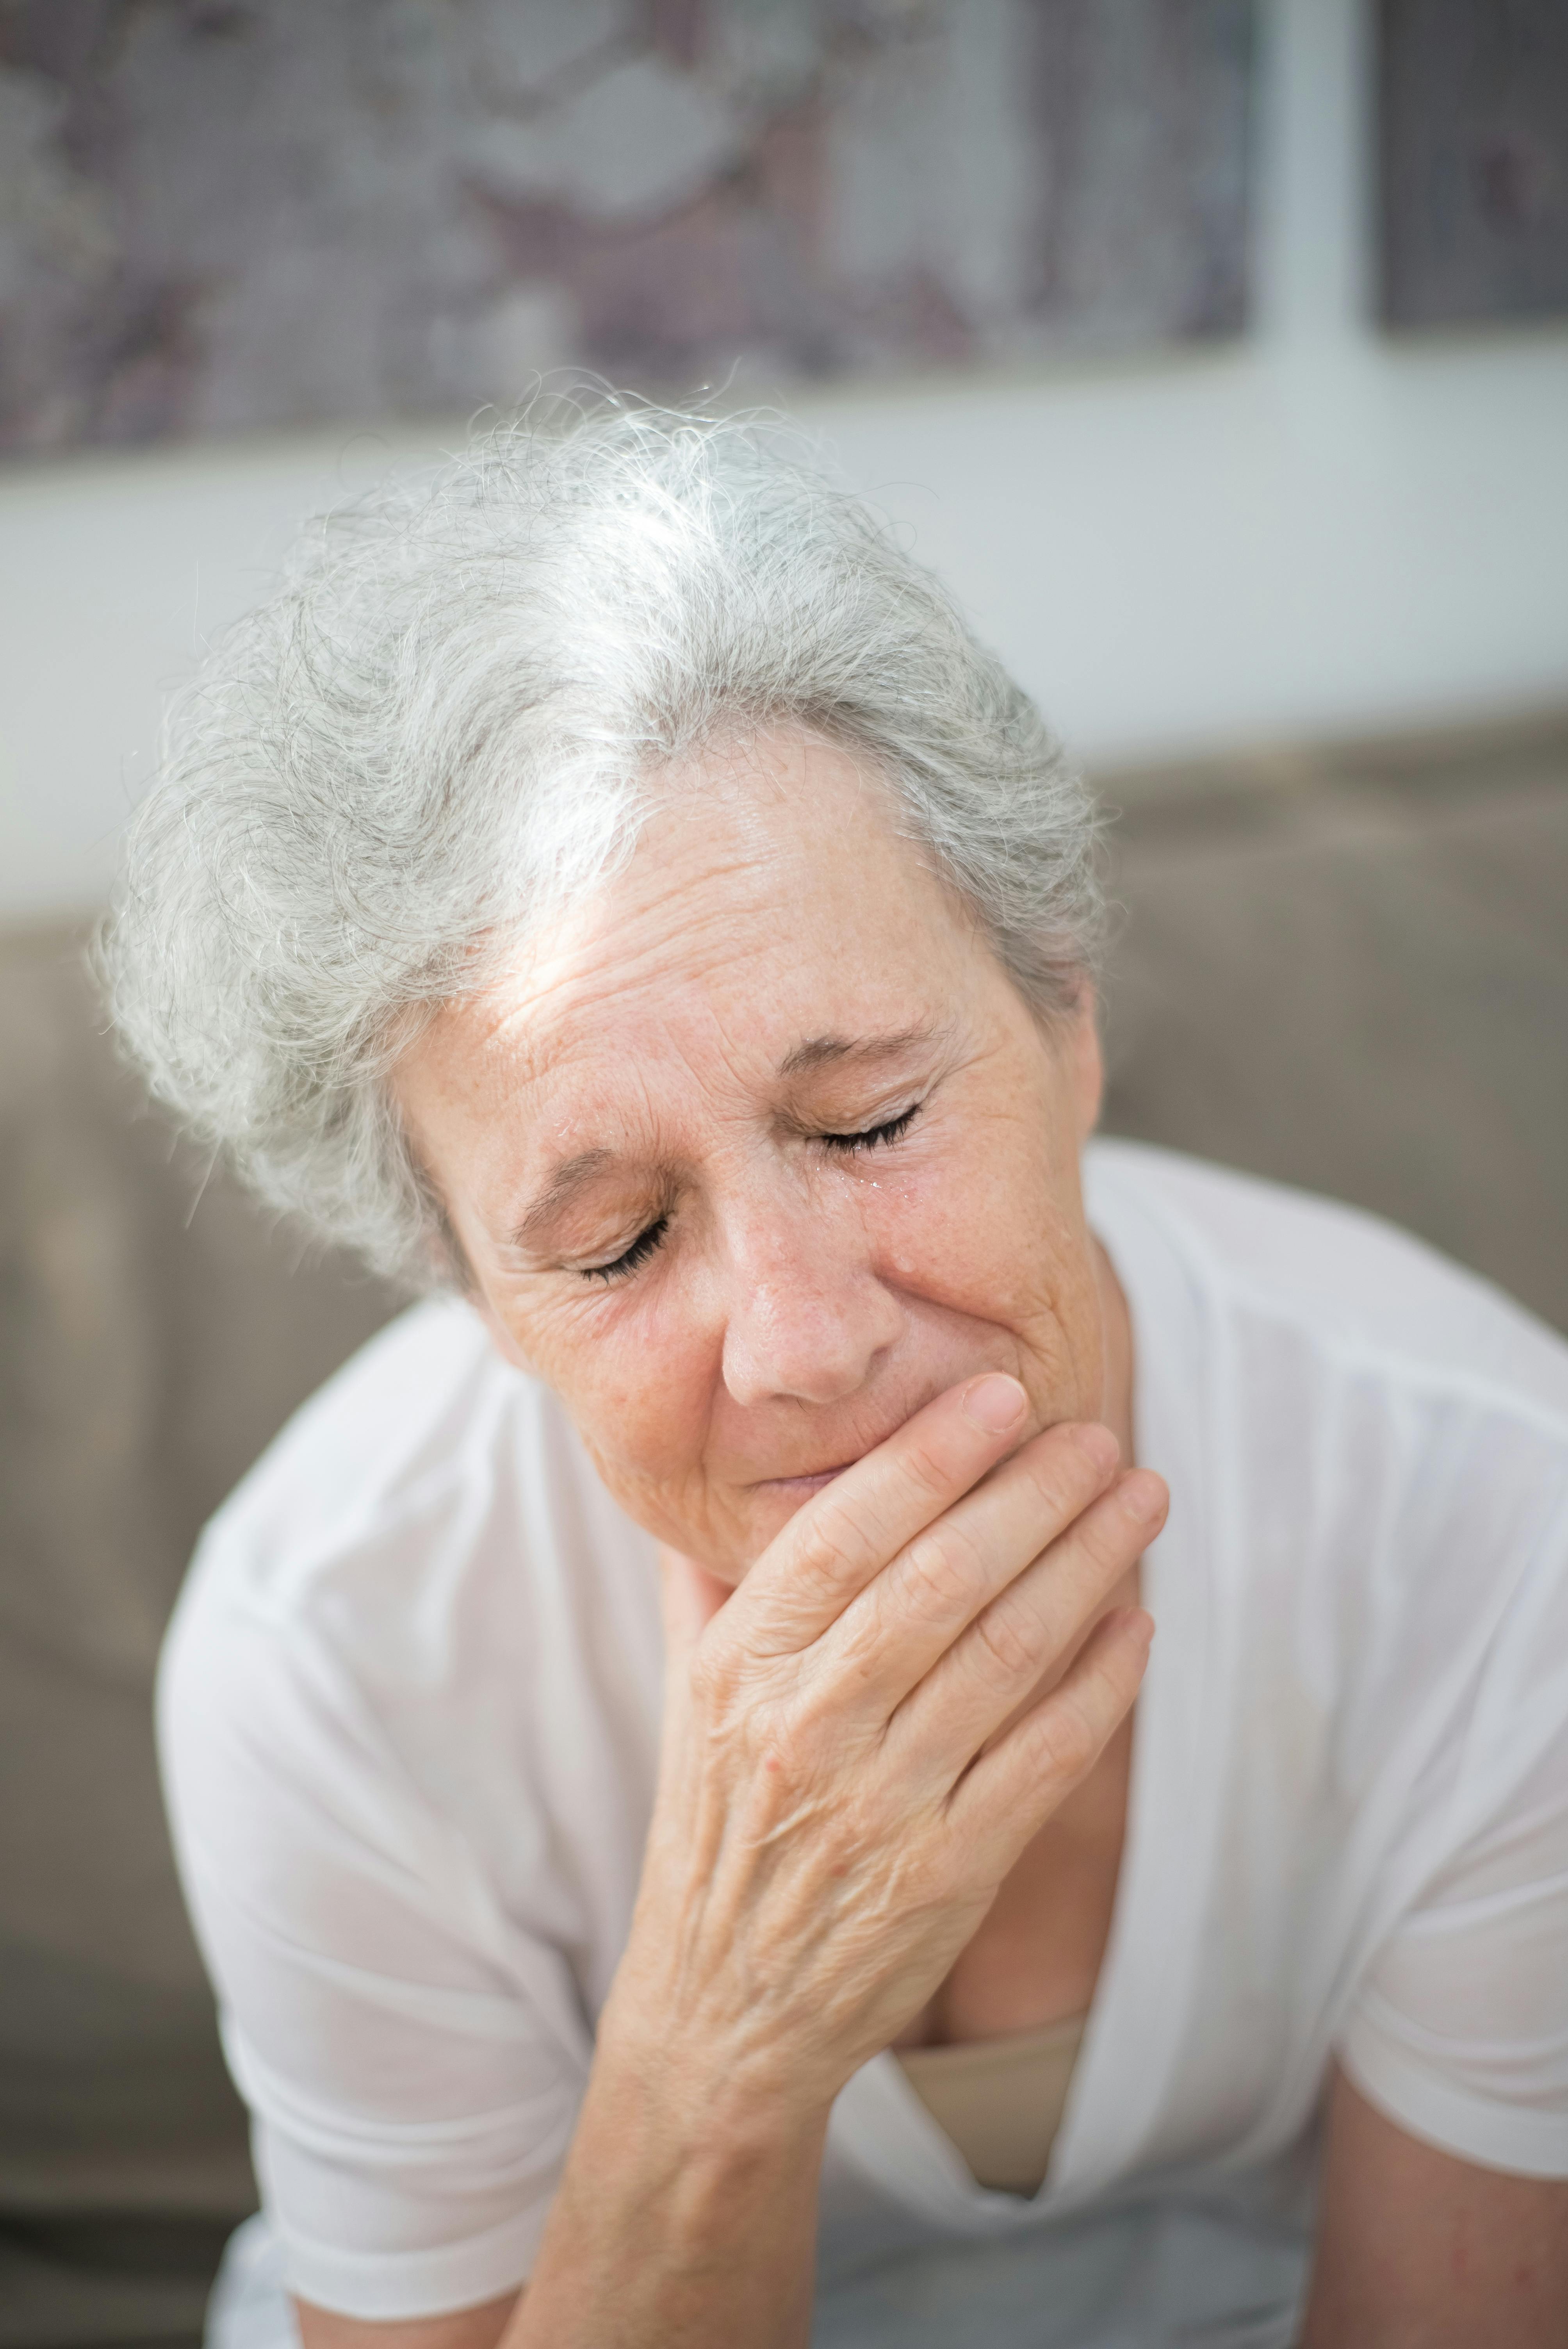 An upset older woman crying with her eyes closed | Source: Pexels